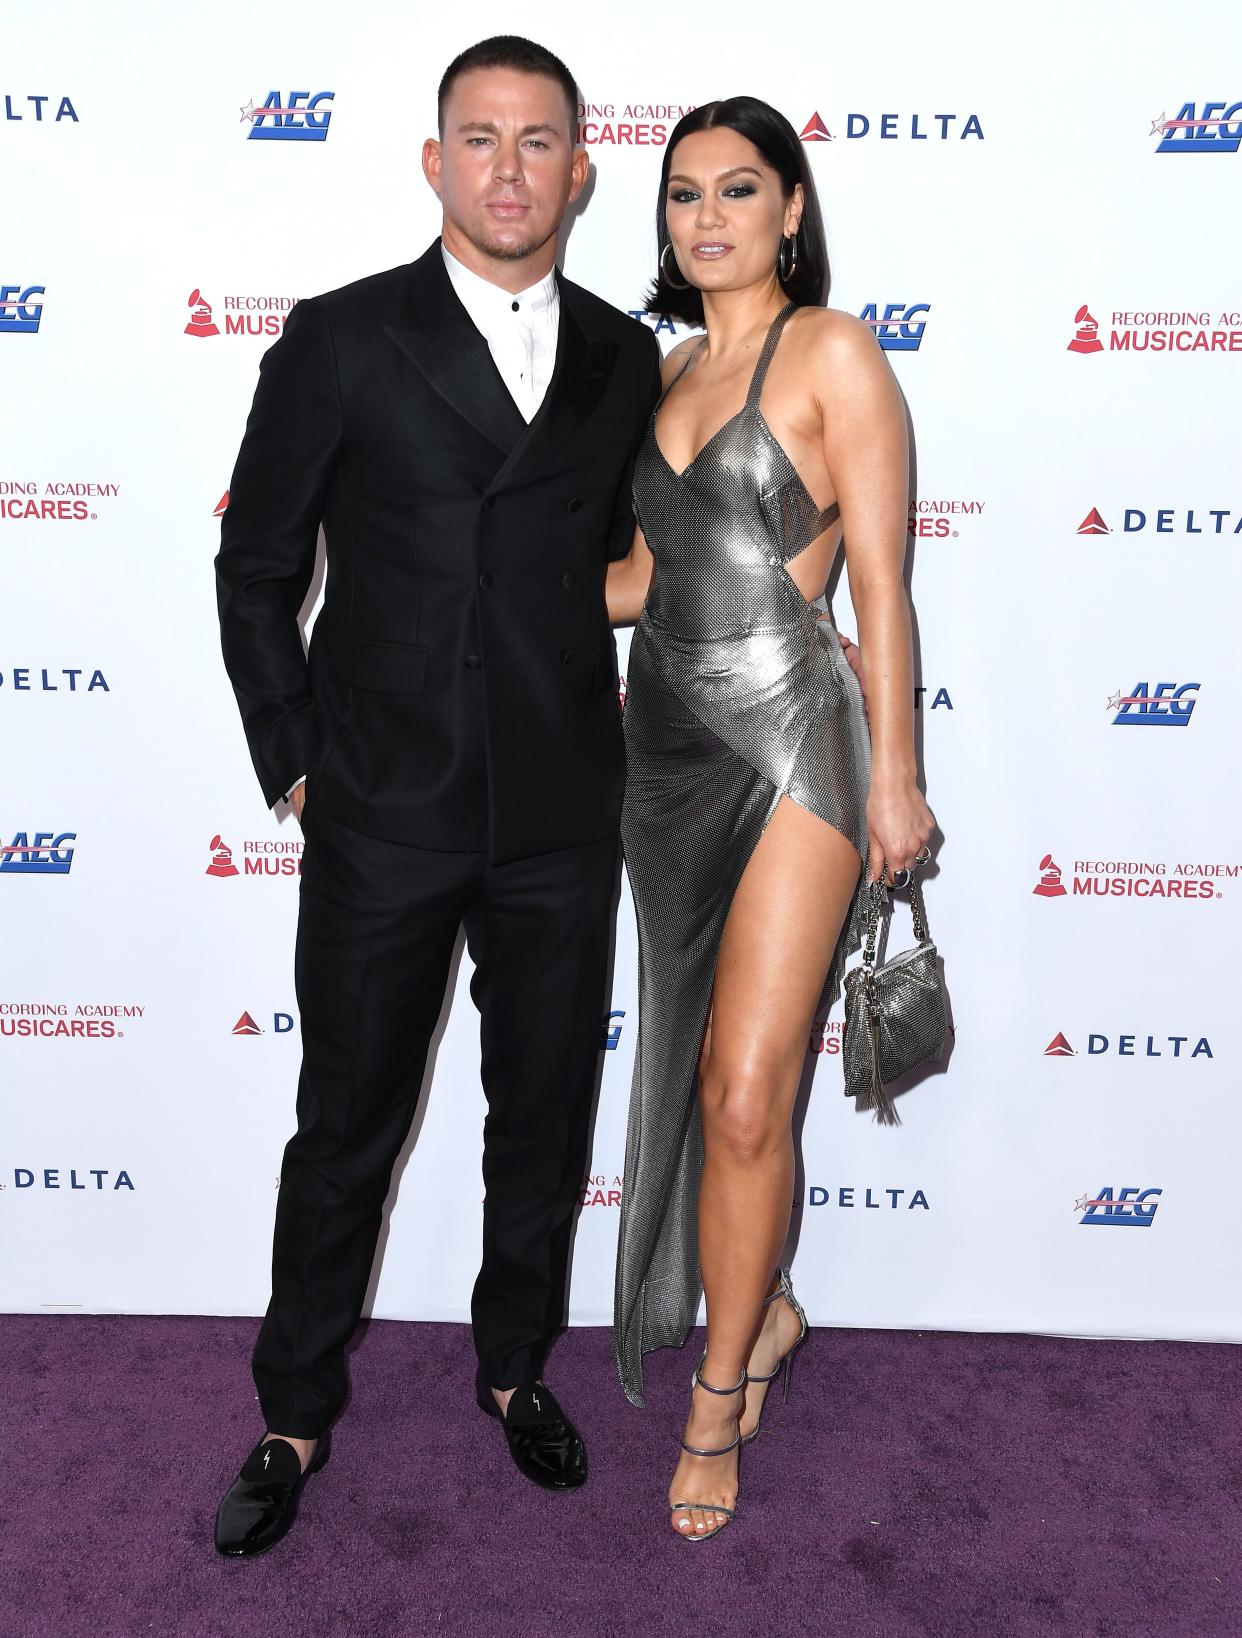 Channing Tatum (left) and Jessie J (right) pose with their arms around each other